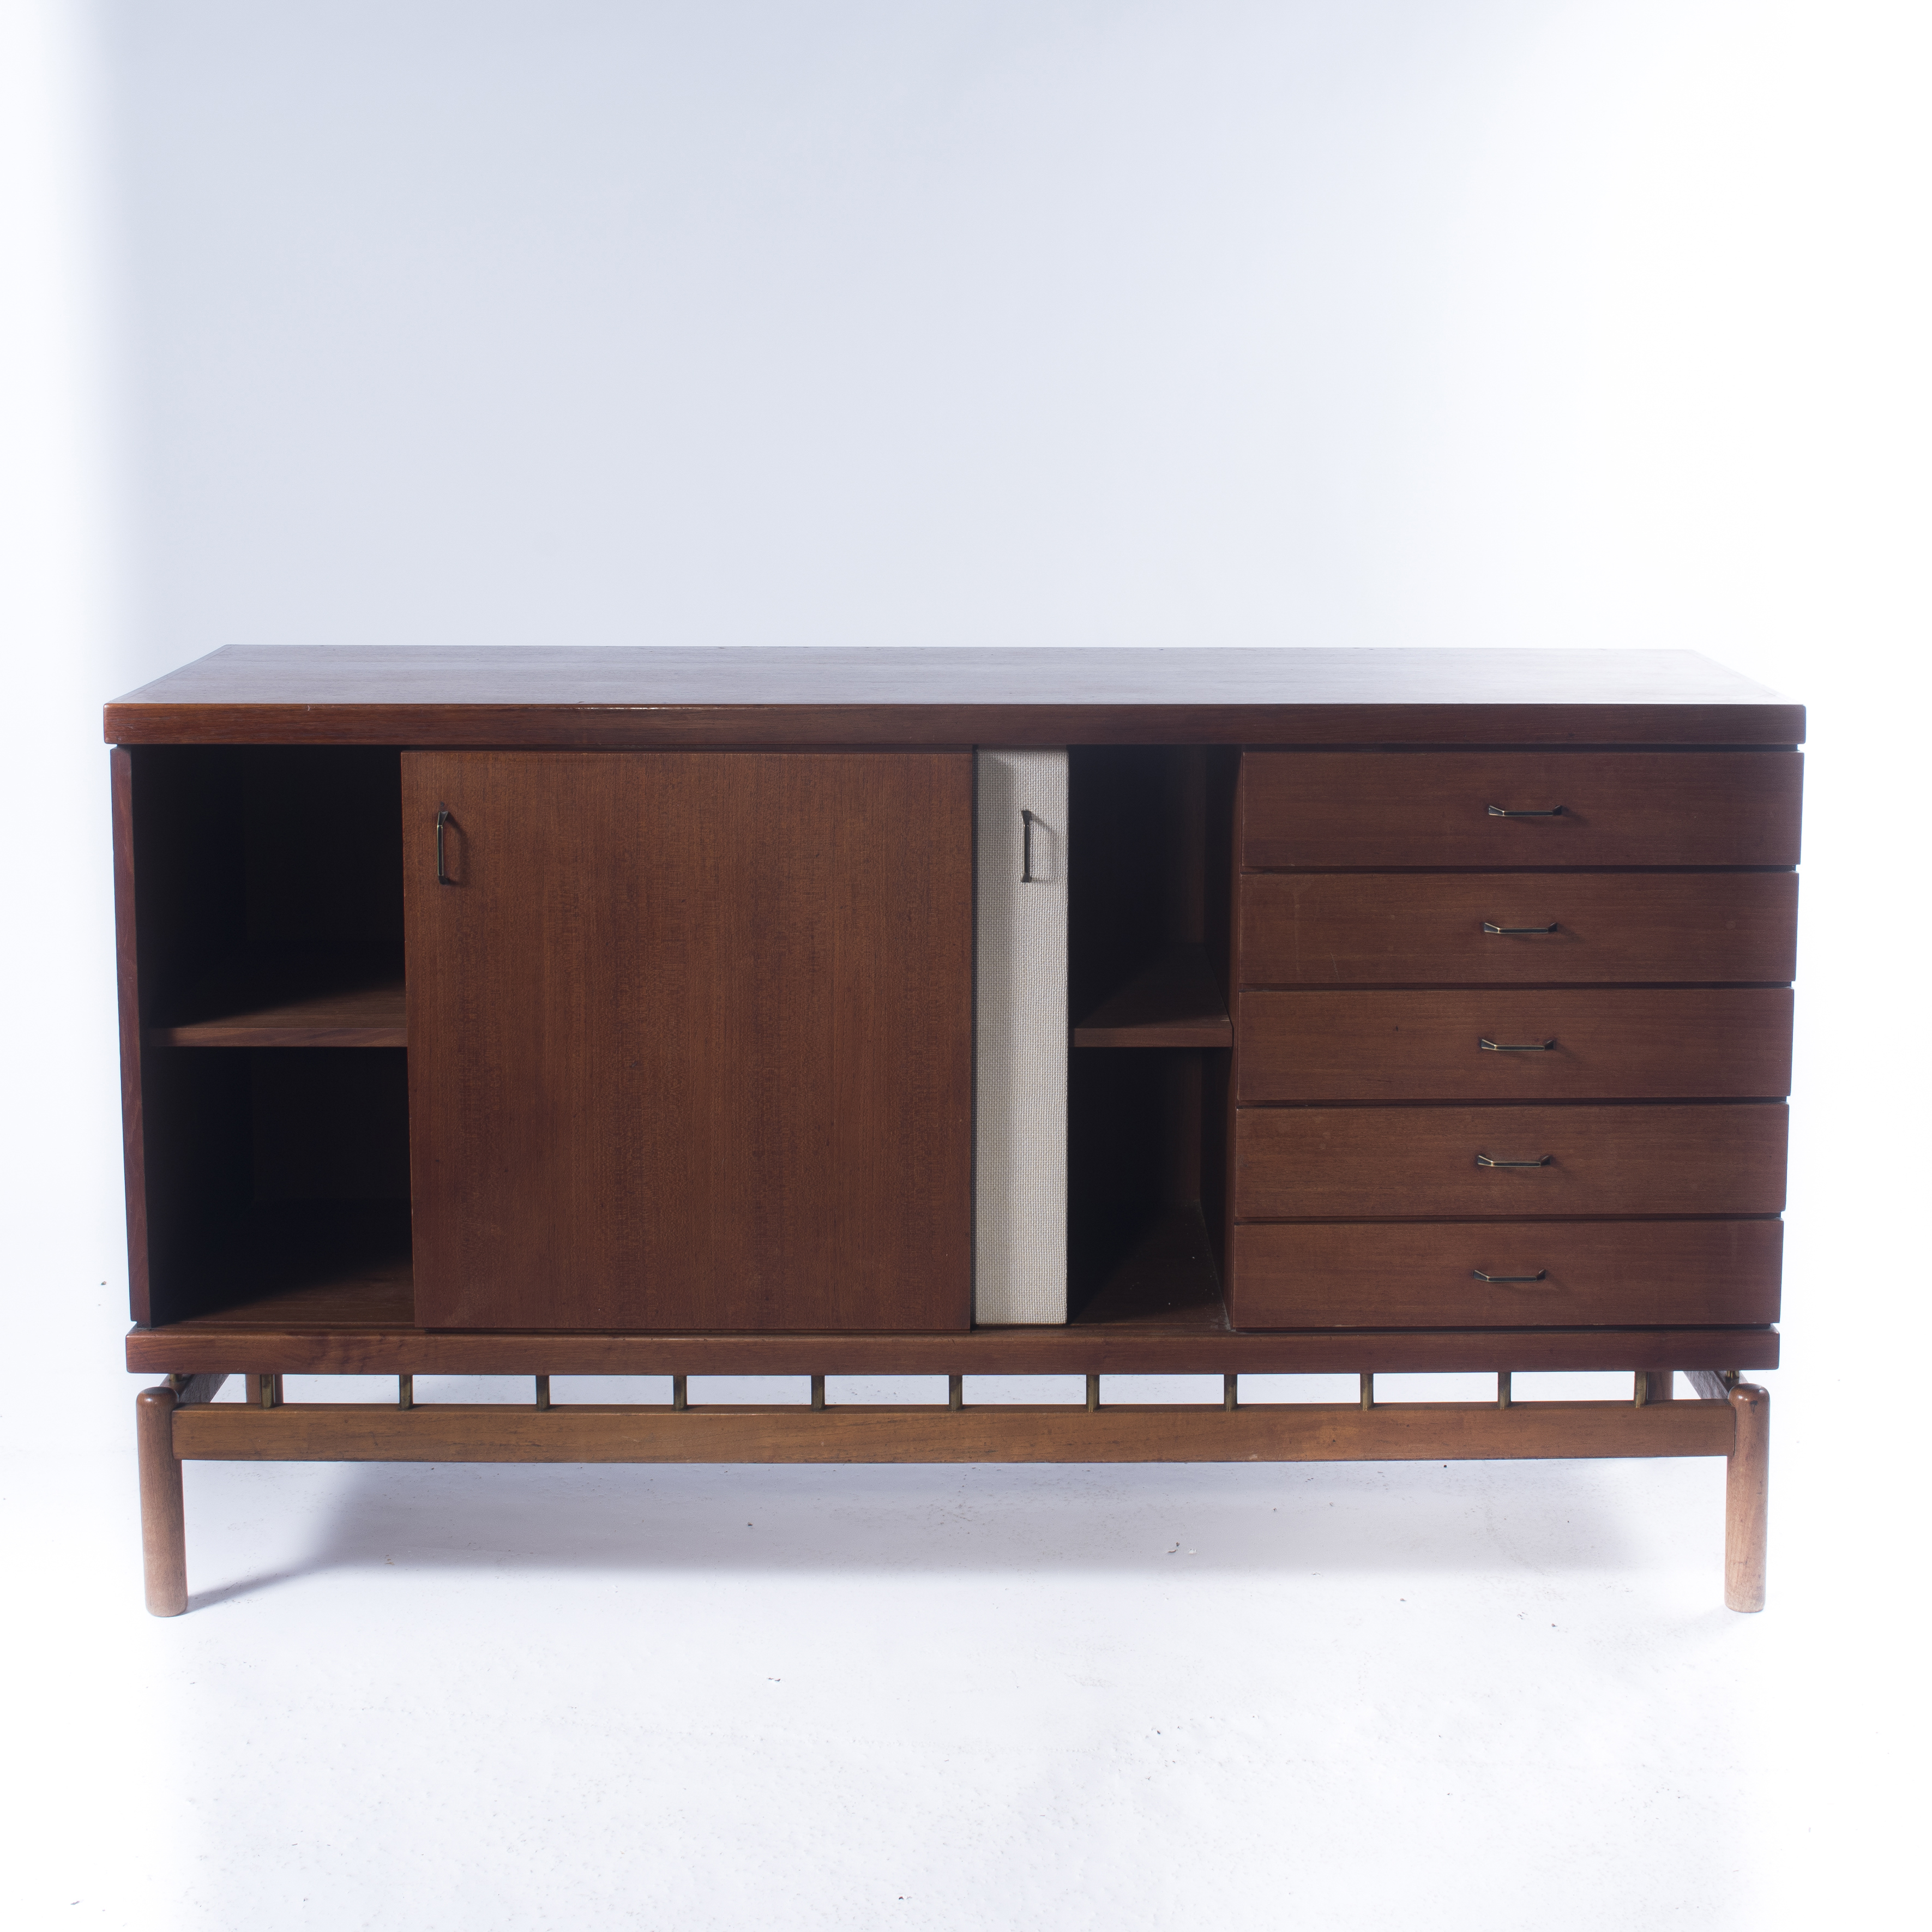 a31-rare-mid-century-sideboard-by-tapiovaara-for-la-permanente-mobili-cant-italy